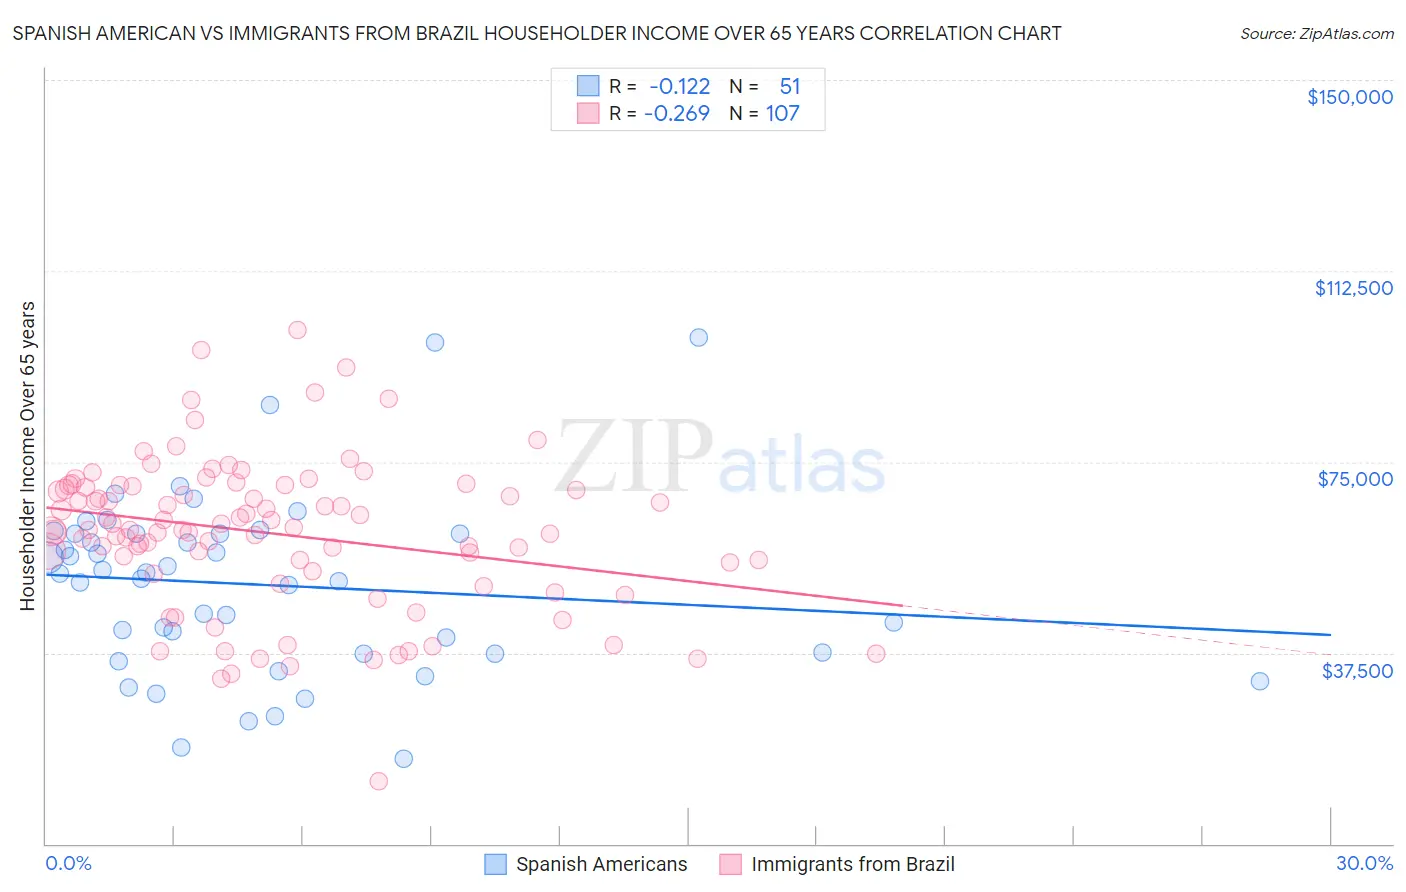 Spanish American vs Immigrants from Brazil Householder Income Over 65 years